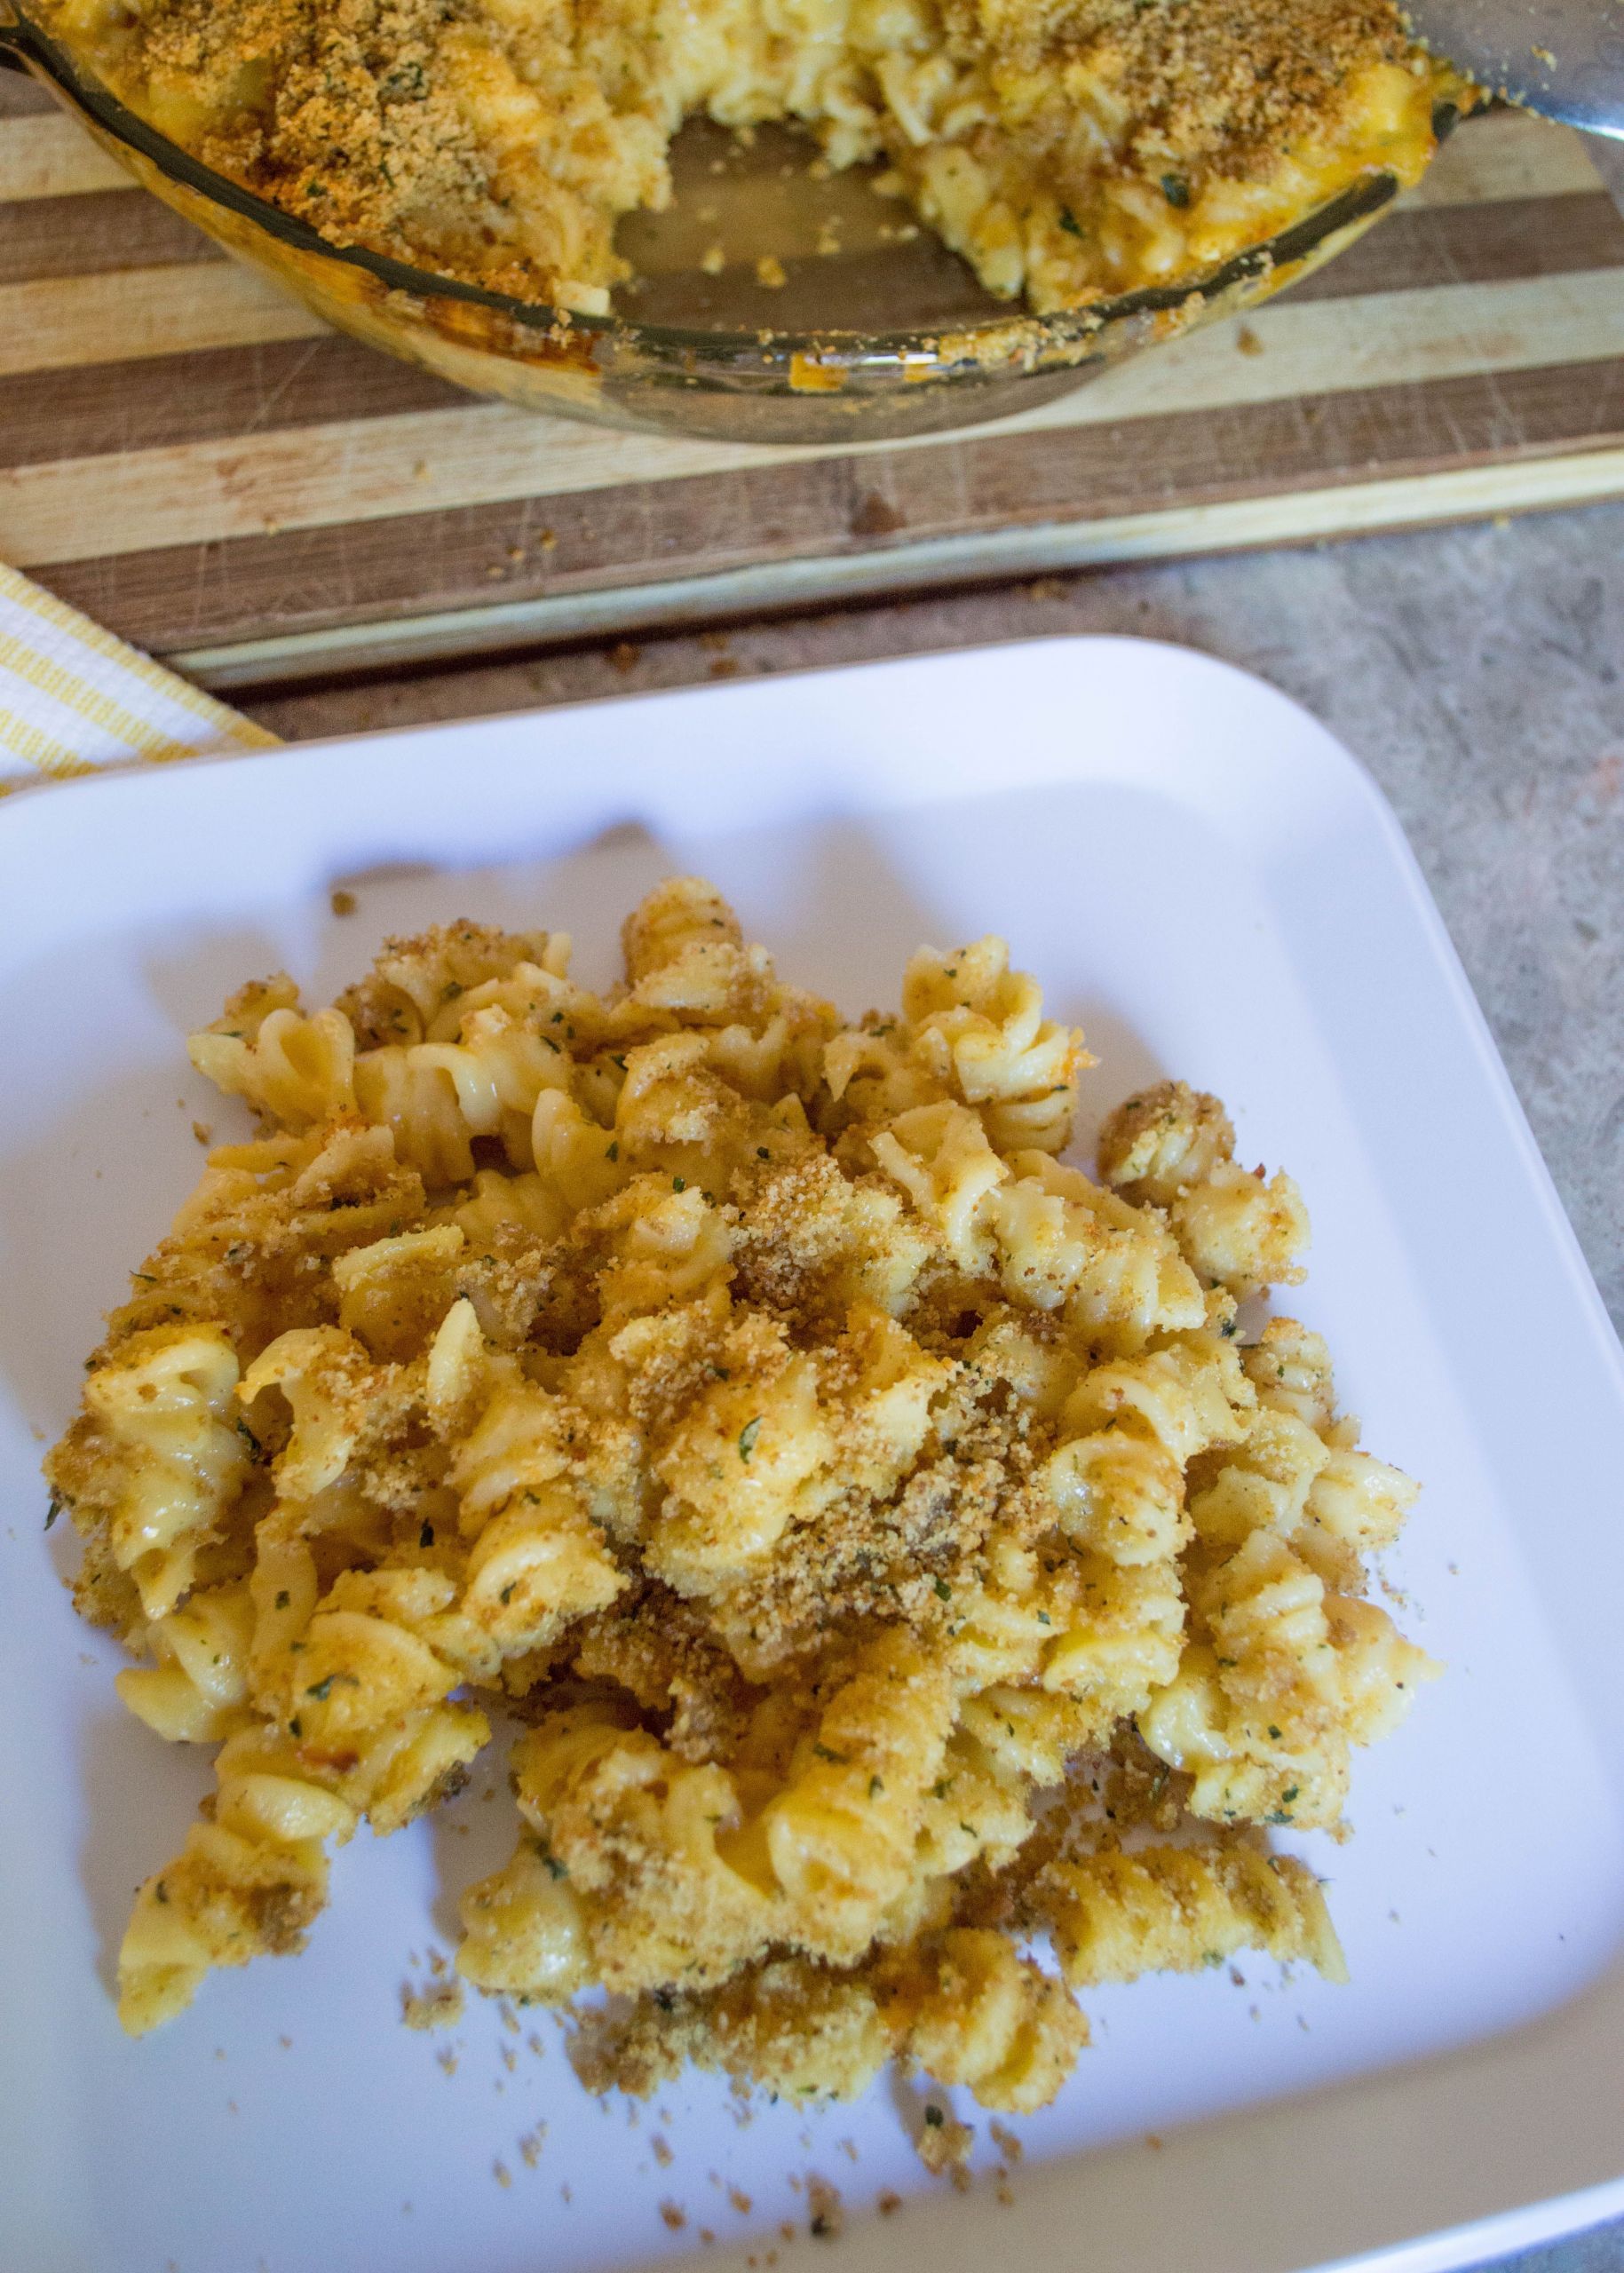 Basic Baked Macaroni And Cheese Recipe
 simple & easy Baked macaroni and cheese recipe